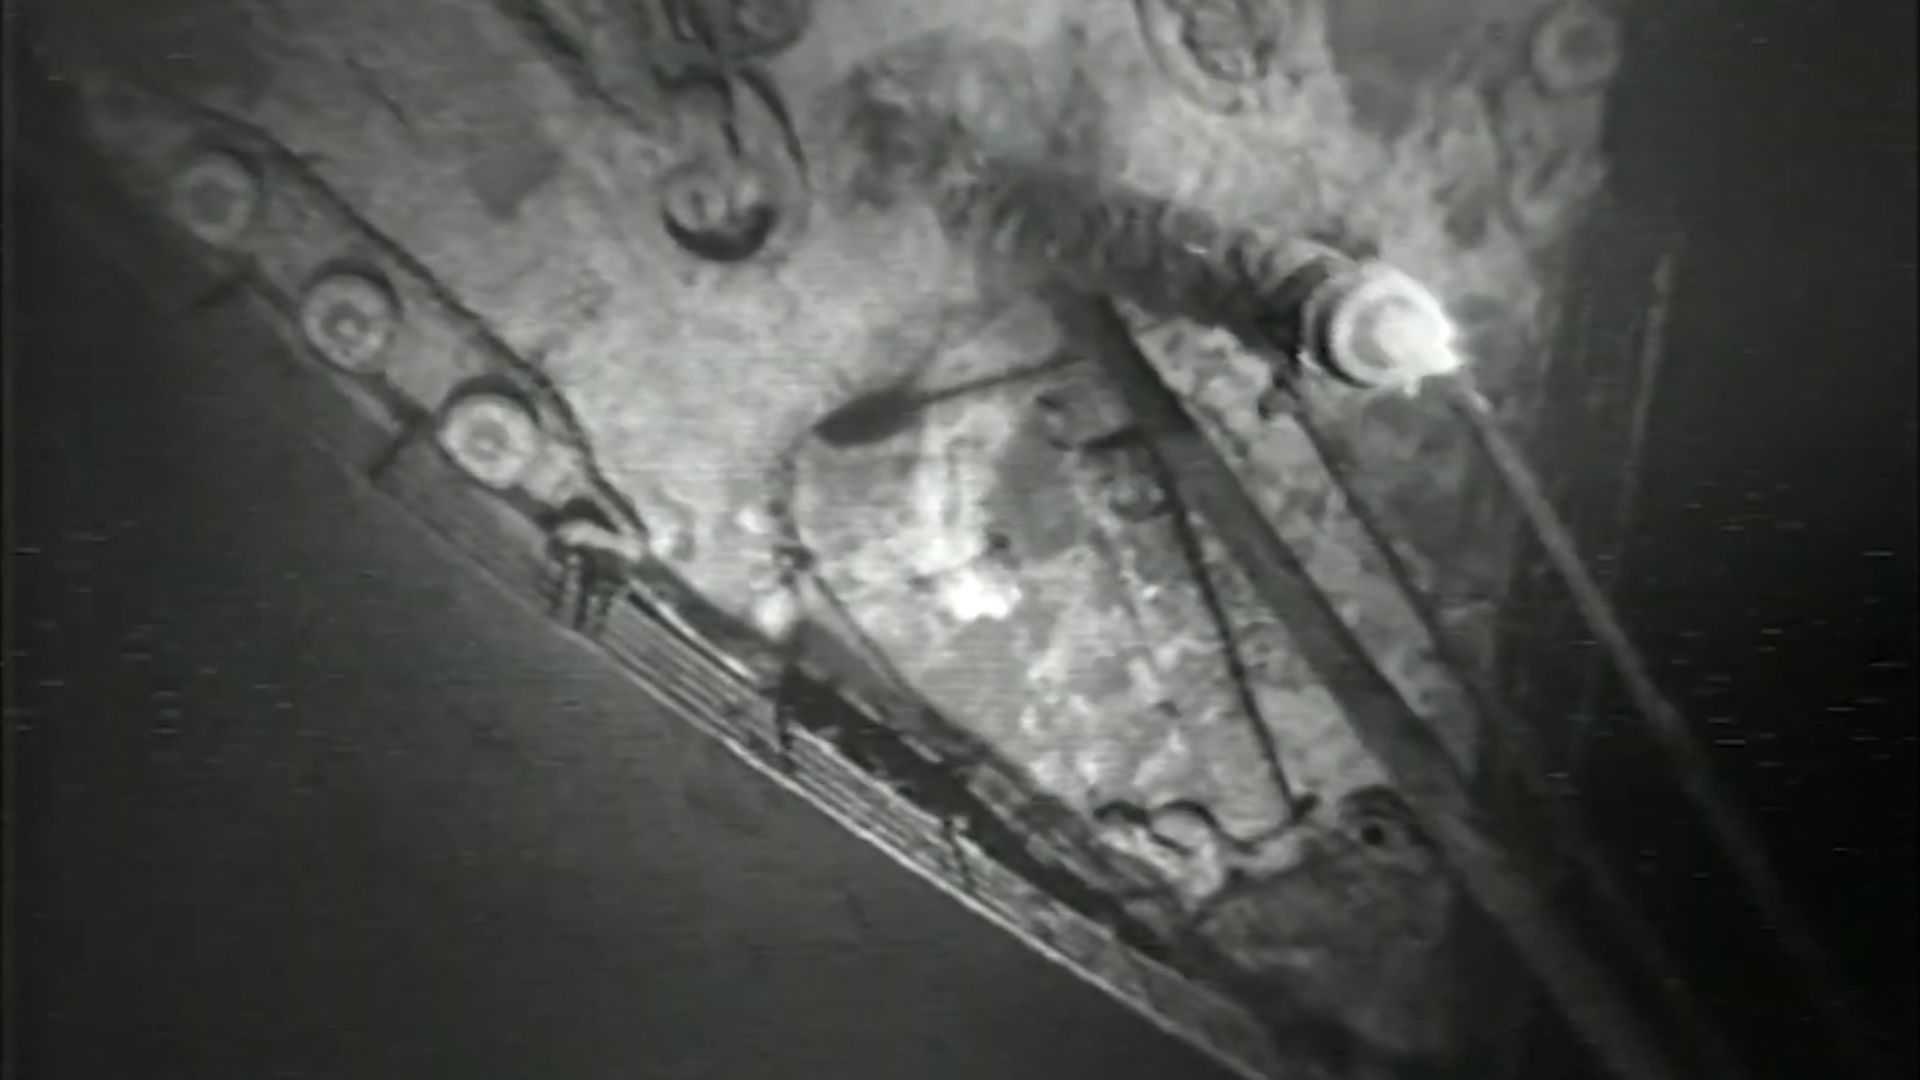 First footage of the Titanic wreck released | CNN